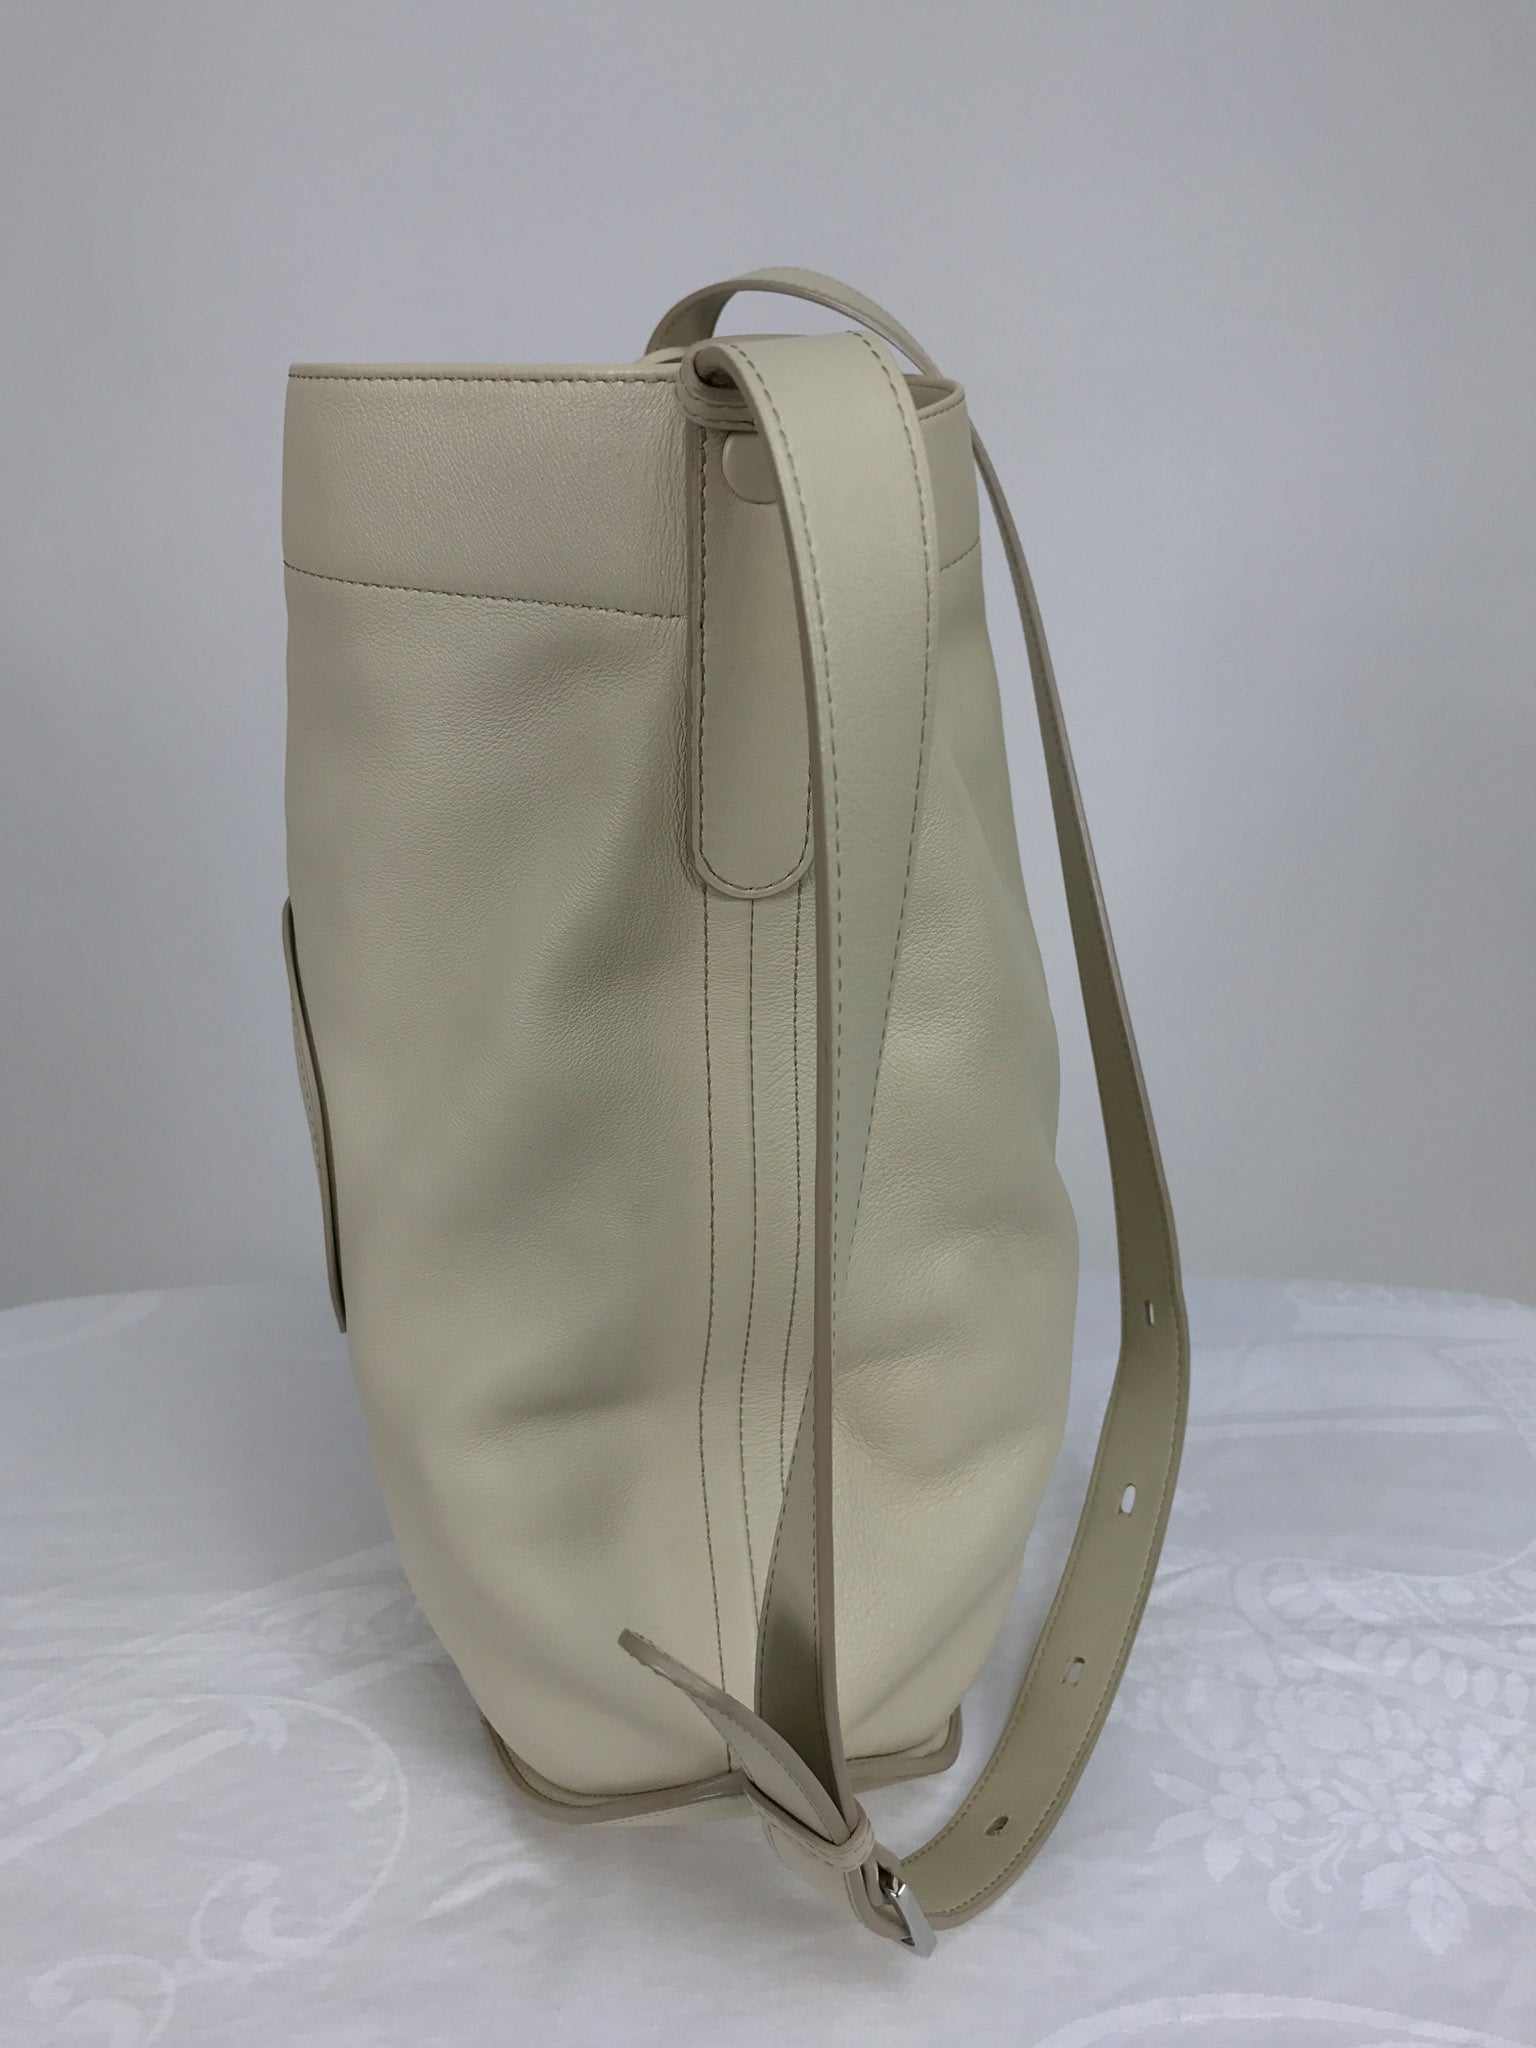 SOLD Delvaux Ivory Leather Pin Holdall Shoulder Bag – Palm Beach Vintage